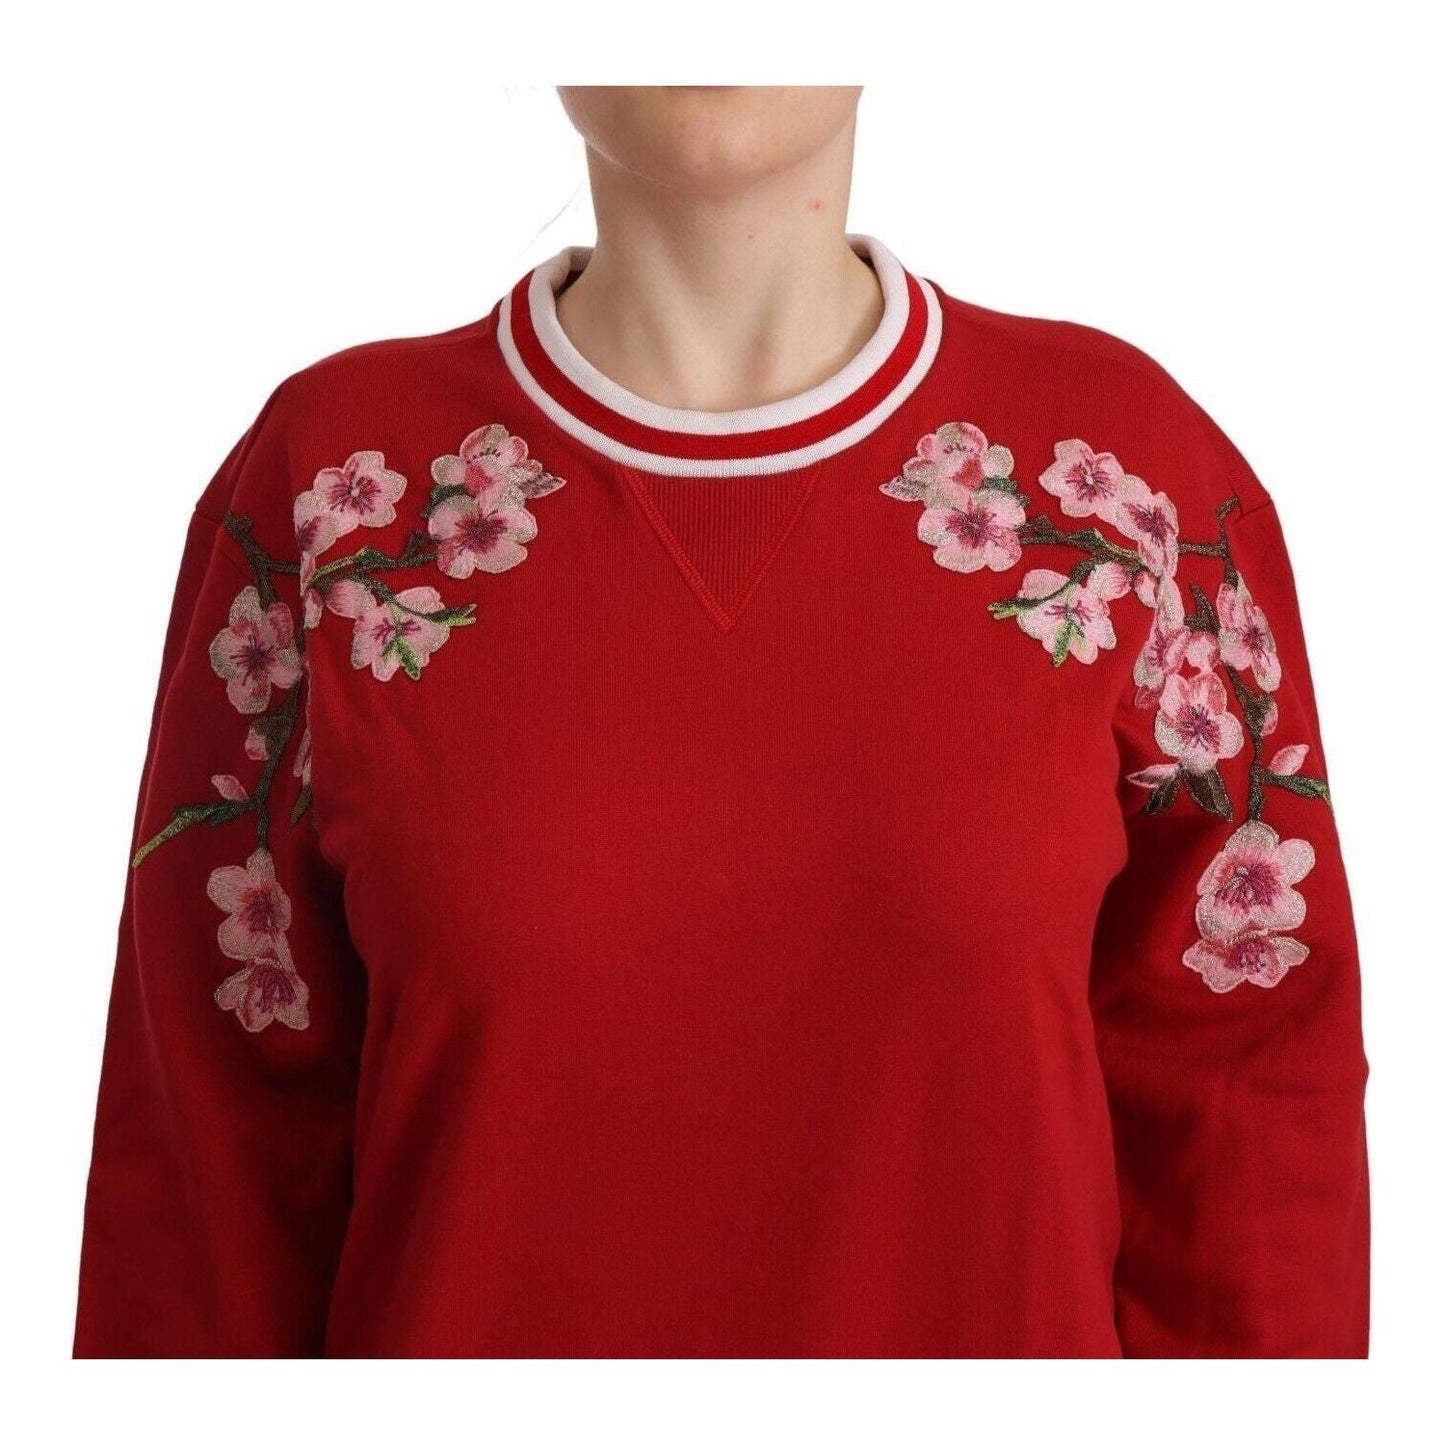 Dolce & Gabbana Elegant Red Crewneck Pullover with Floral Motif WOMAN SWEATERS red-cotton-crewneck-dglove-pullover-sweater s-l1600-3-17-189e9cc3-e04.jpg